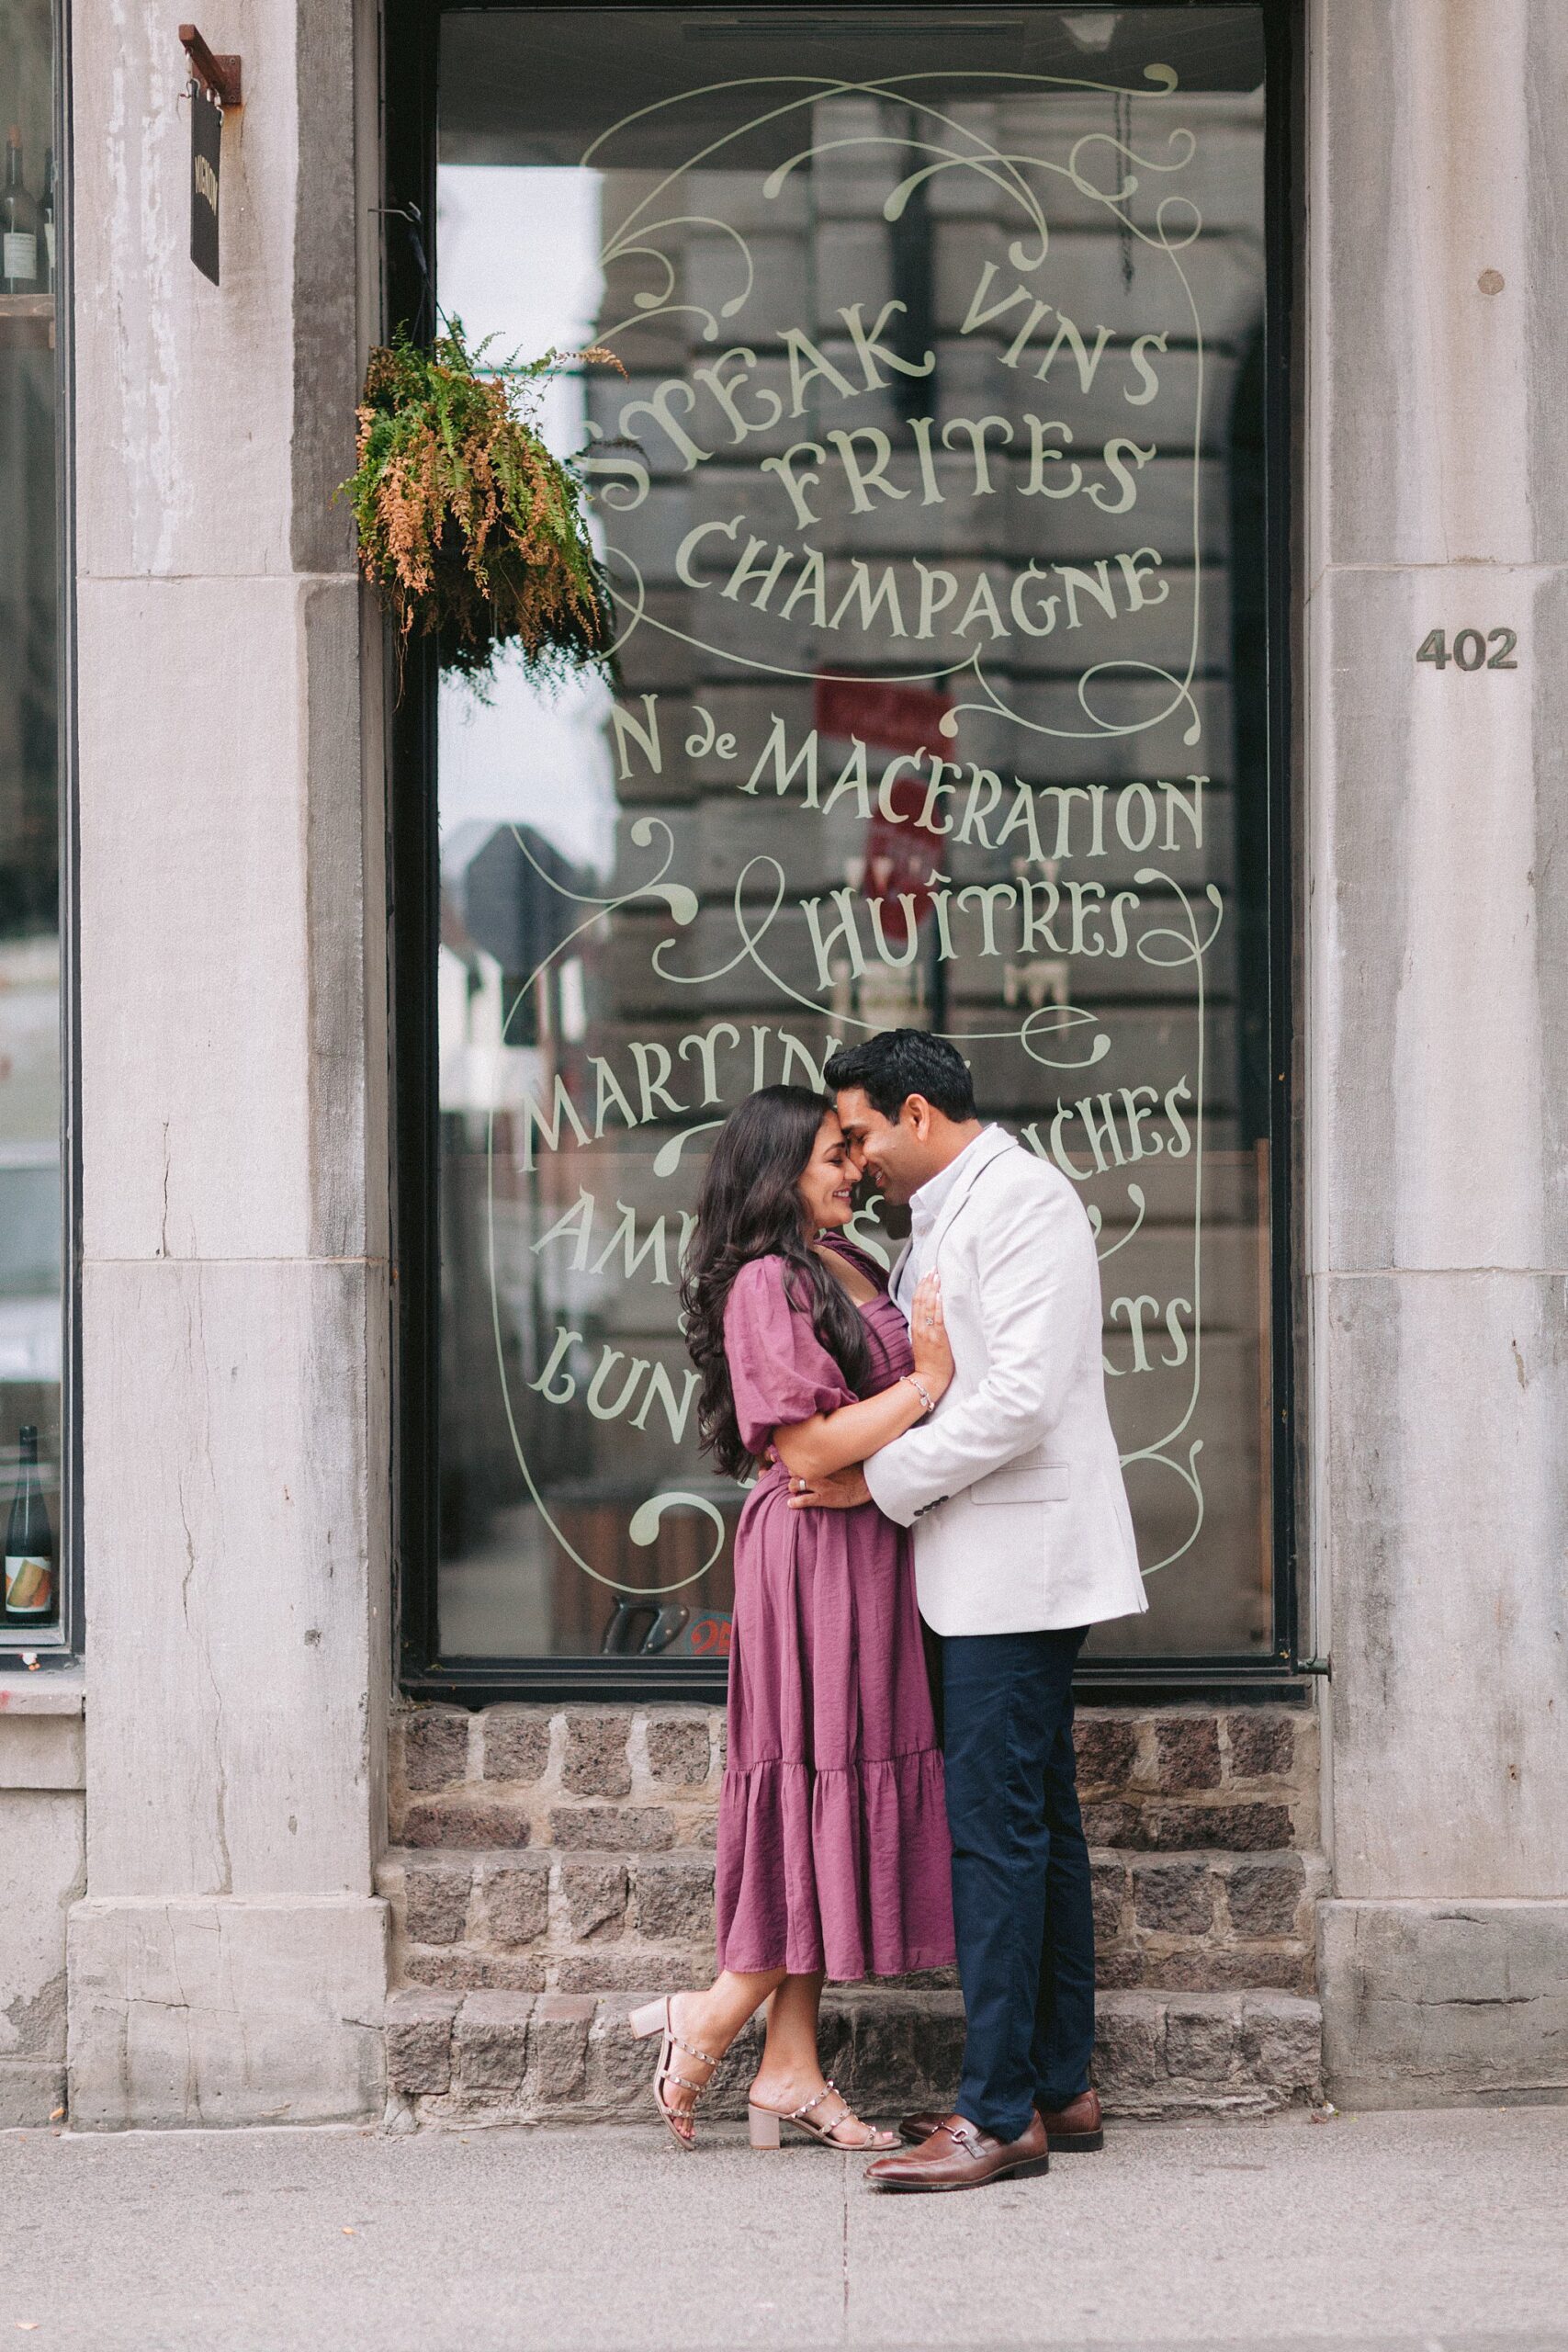 From Montreal, with love: A glimpse of their engagement journey.